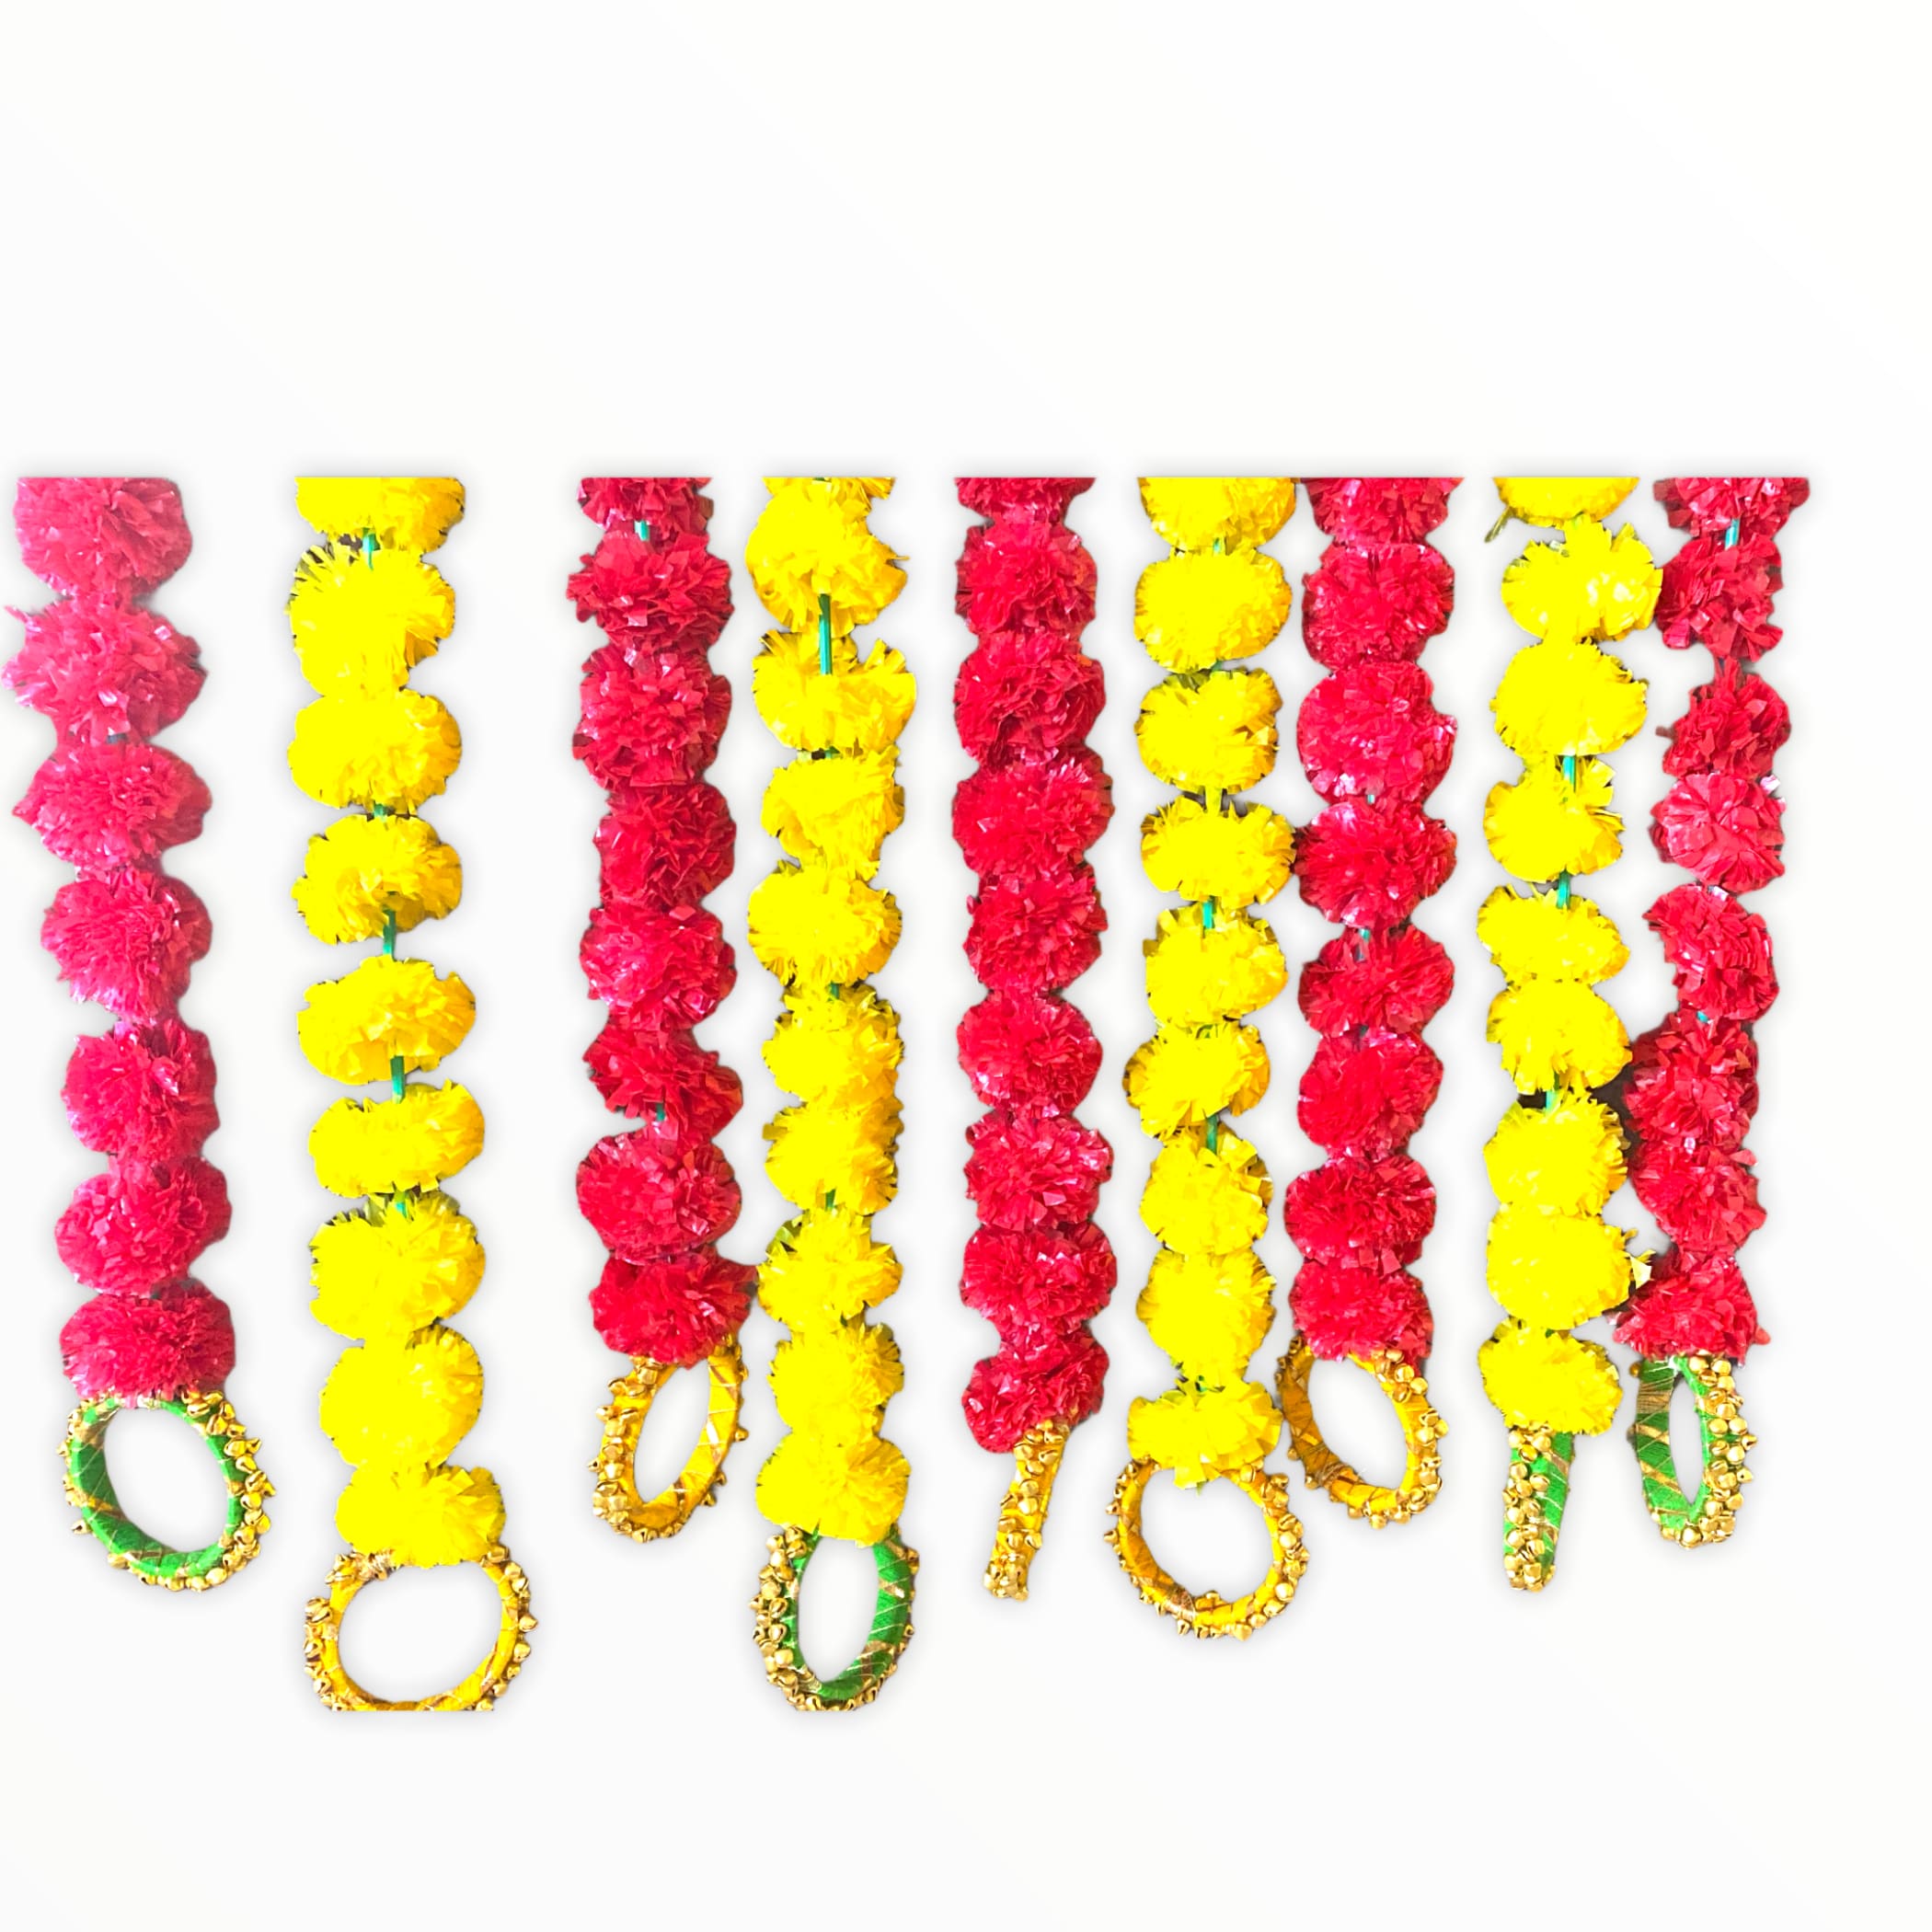 Set of 5 marigold strings with ghungroo diwali decoration